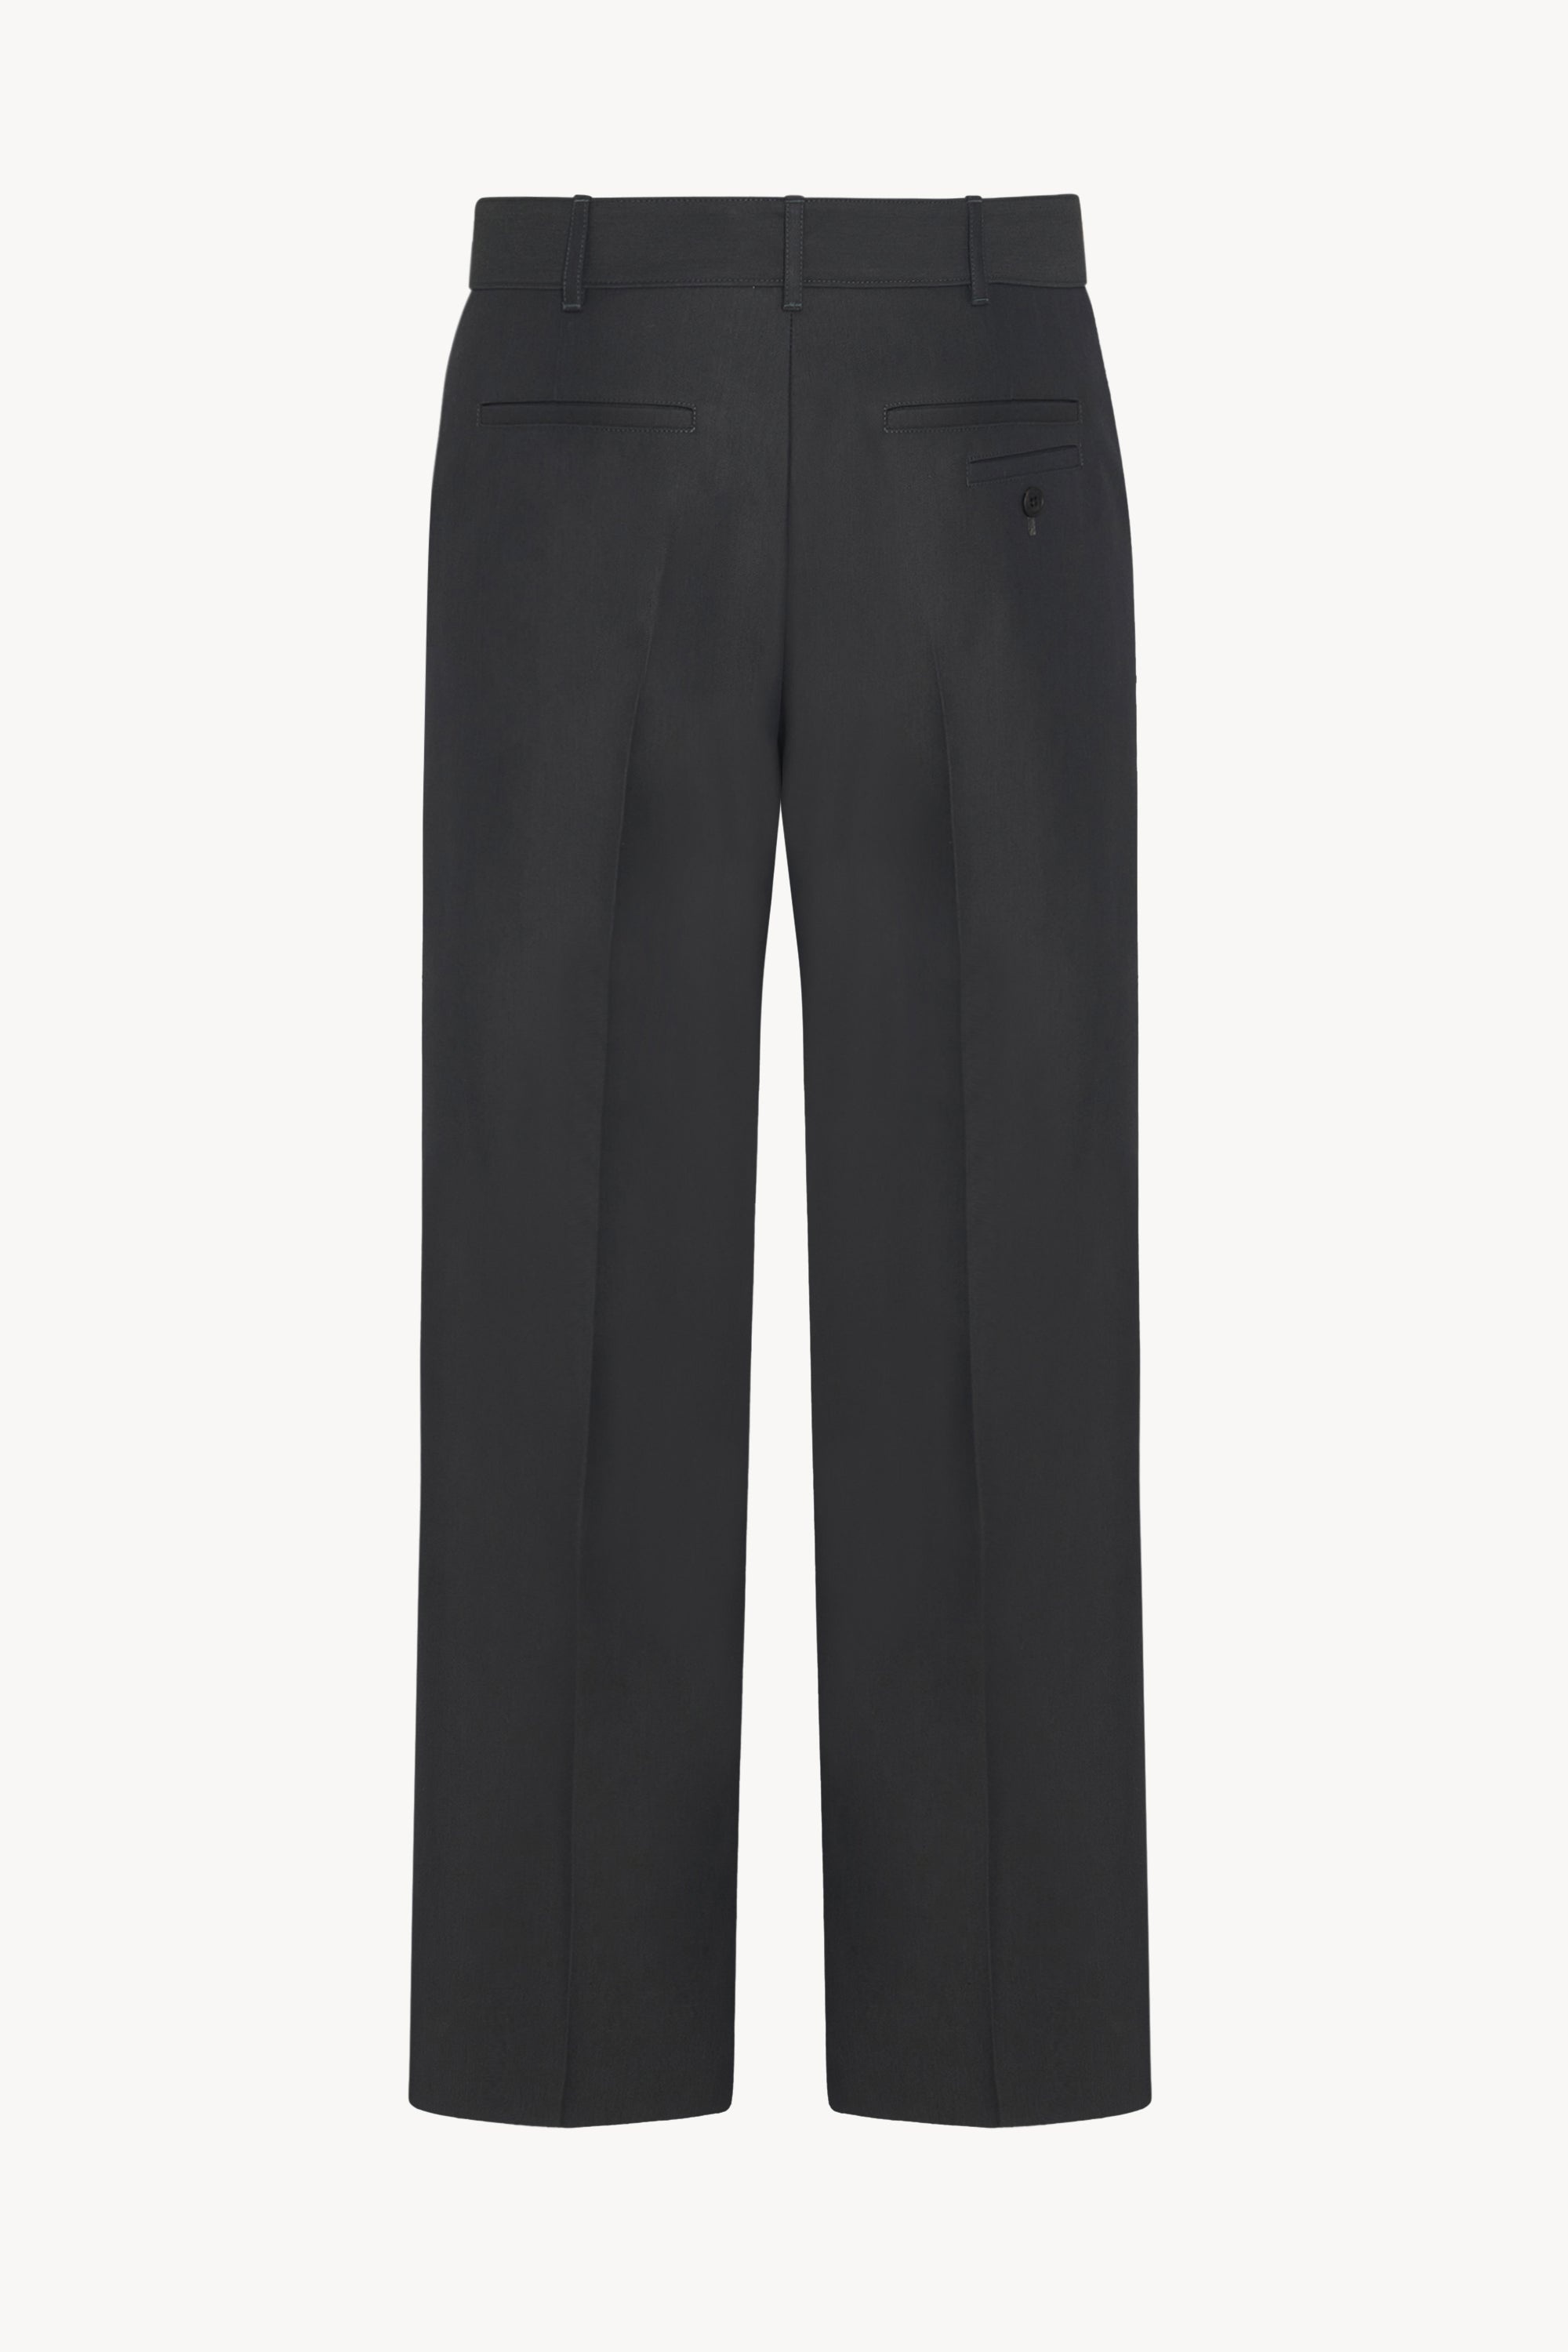 Rosco Pant in Cotton and Nylon - 2